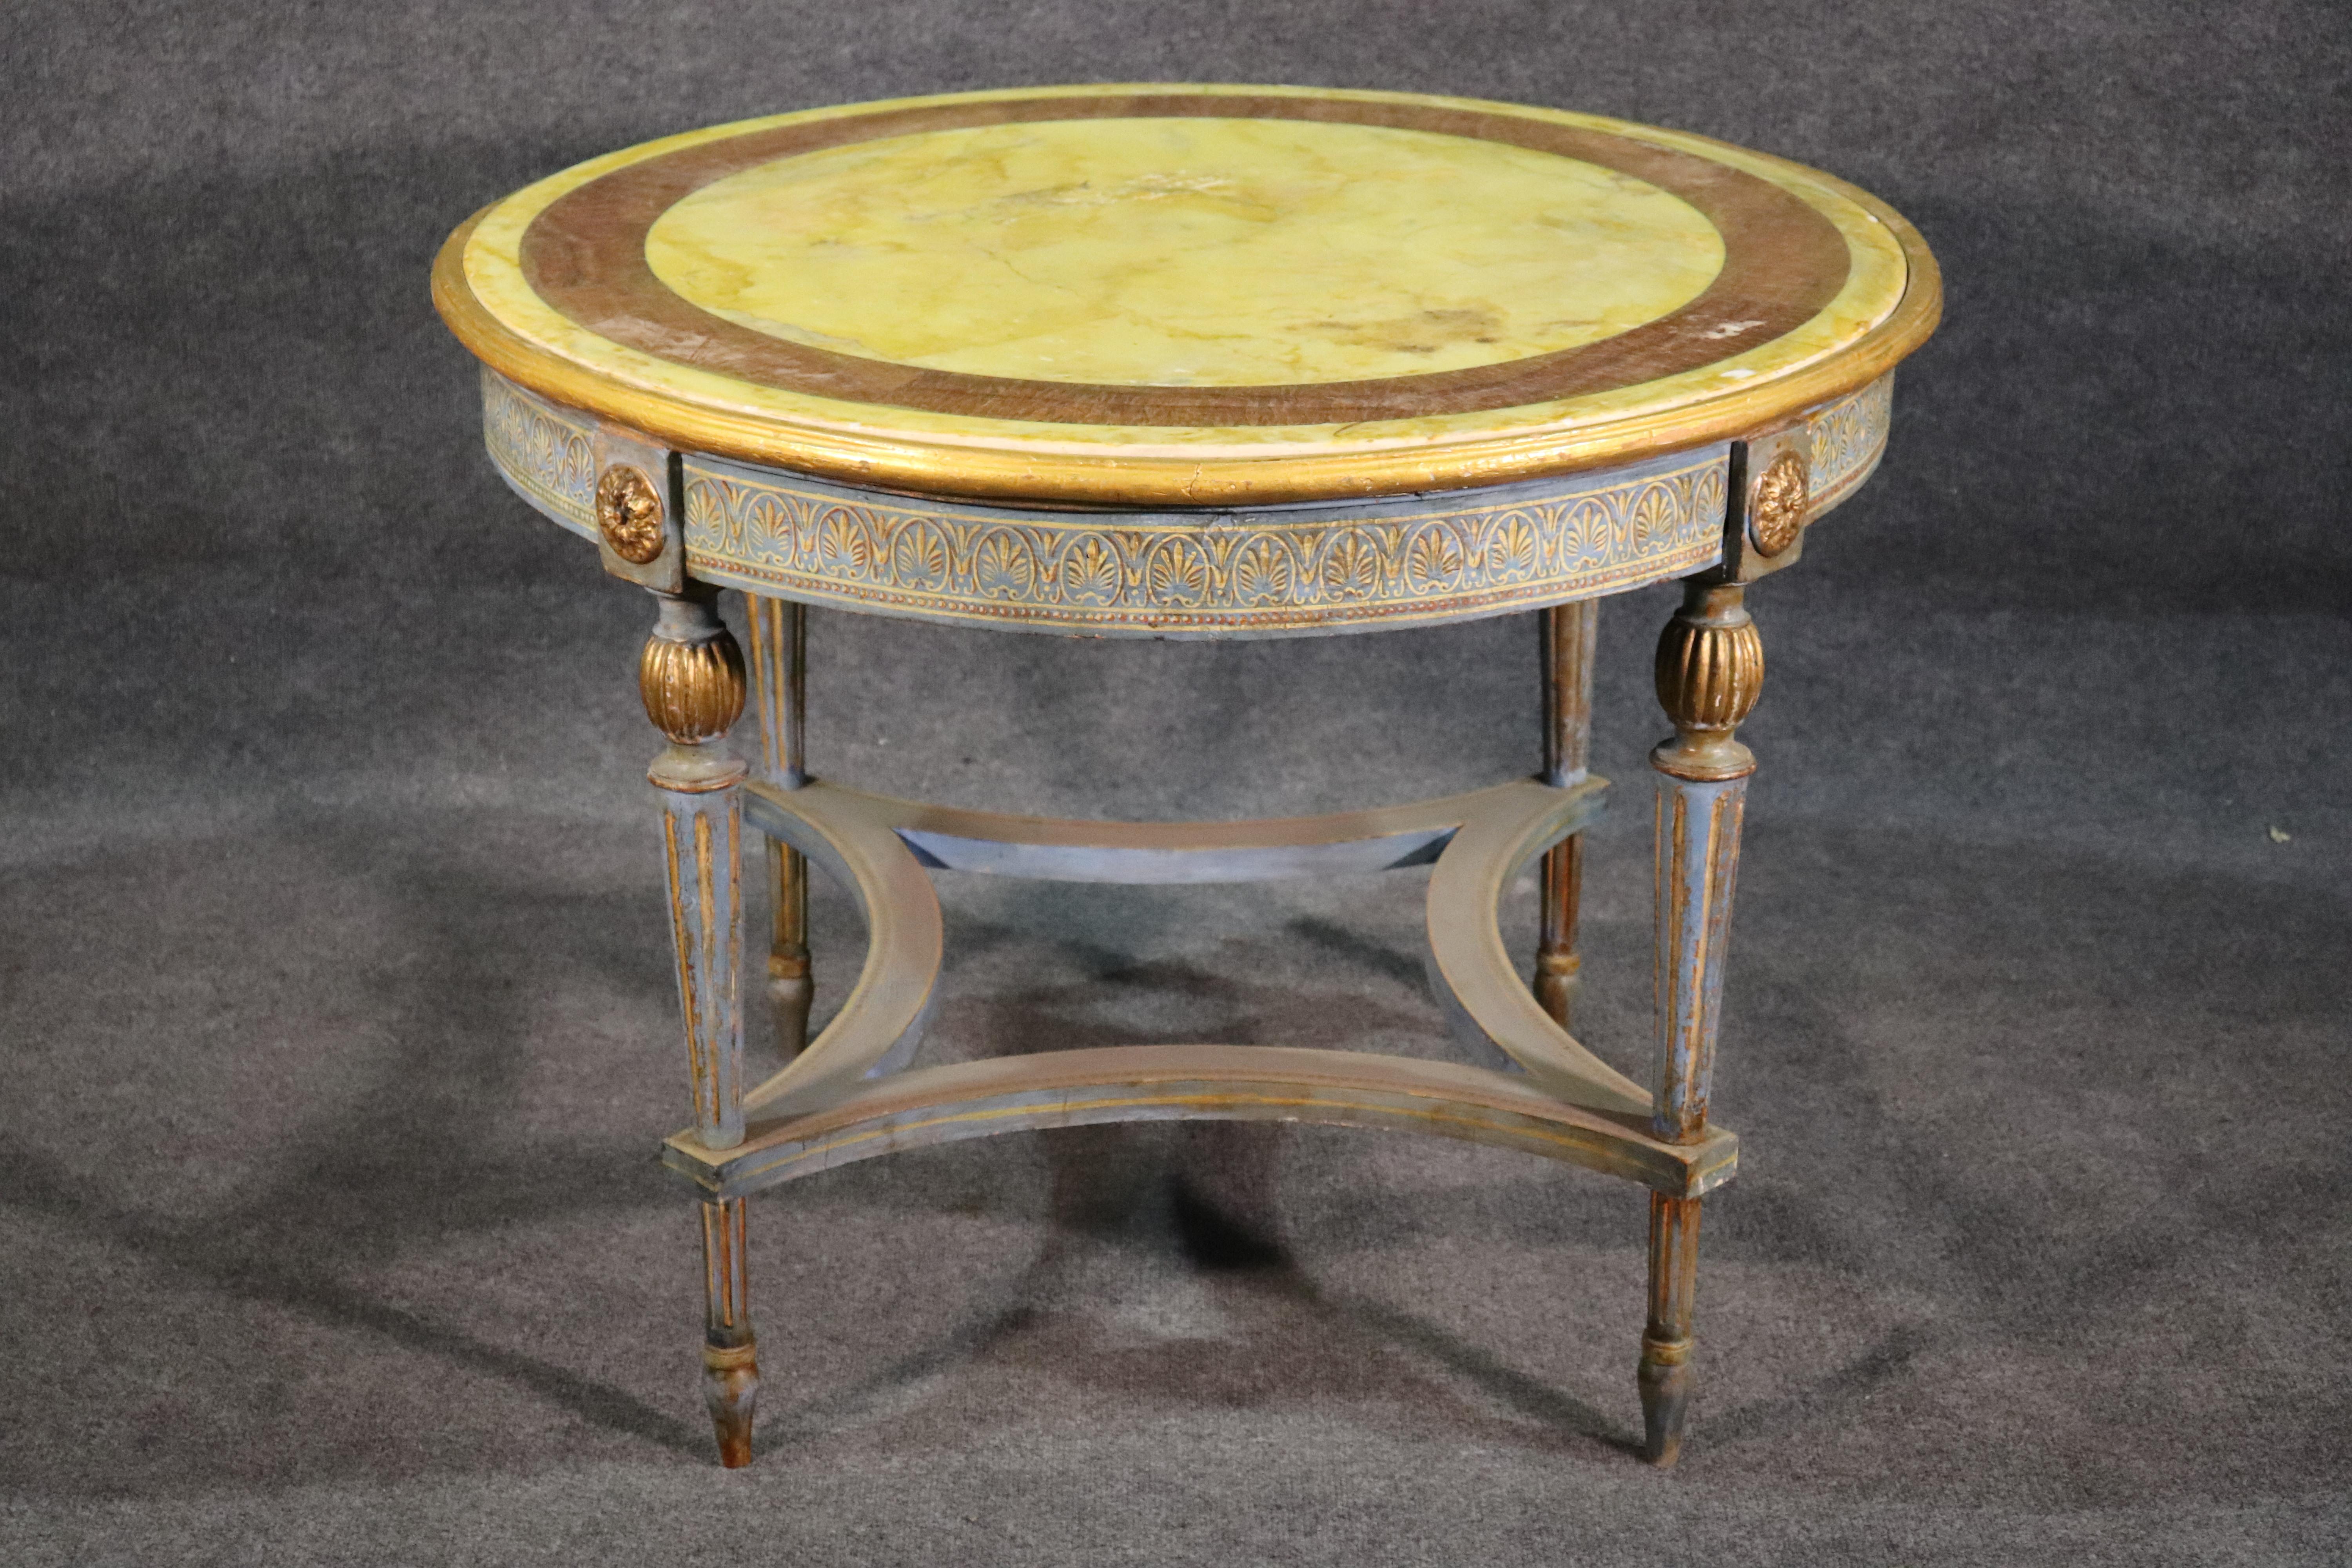 This is a rare Russian table with a beautiful color combination of pale yellow and light blue-gray painted base with gold gilded details. Dates to the 1840s.